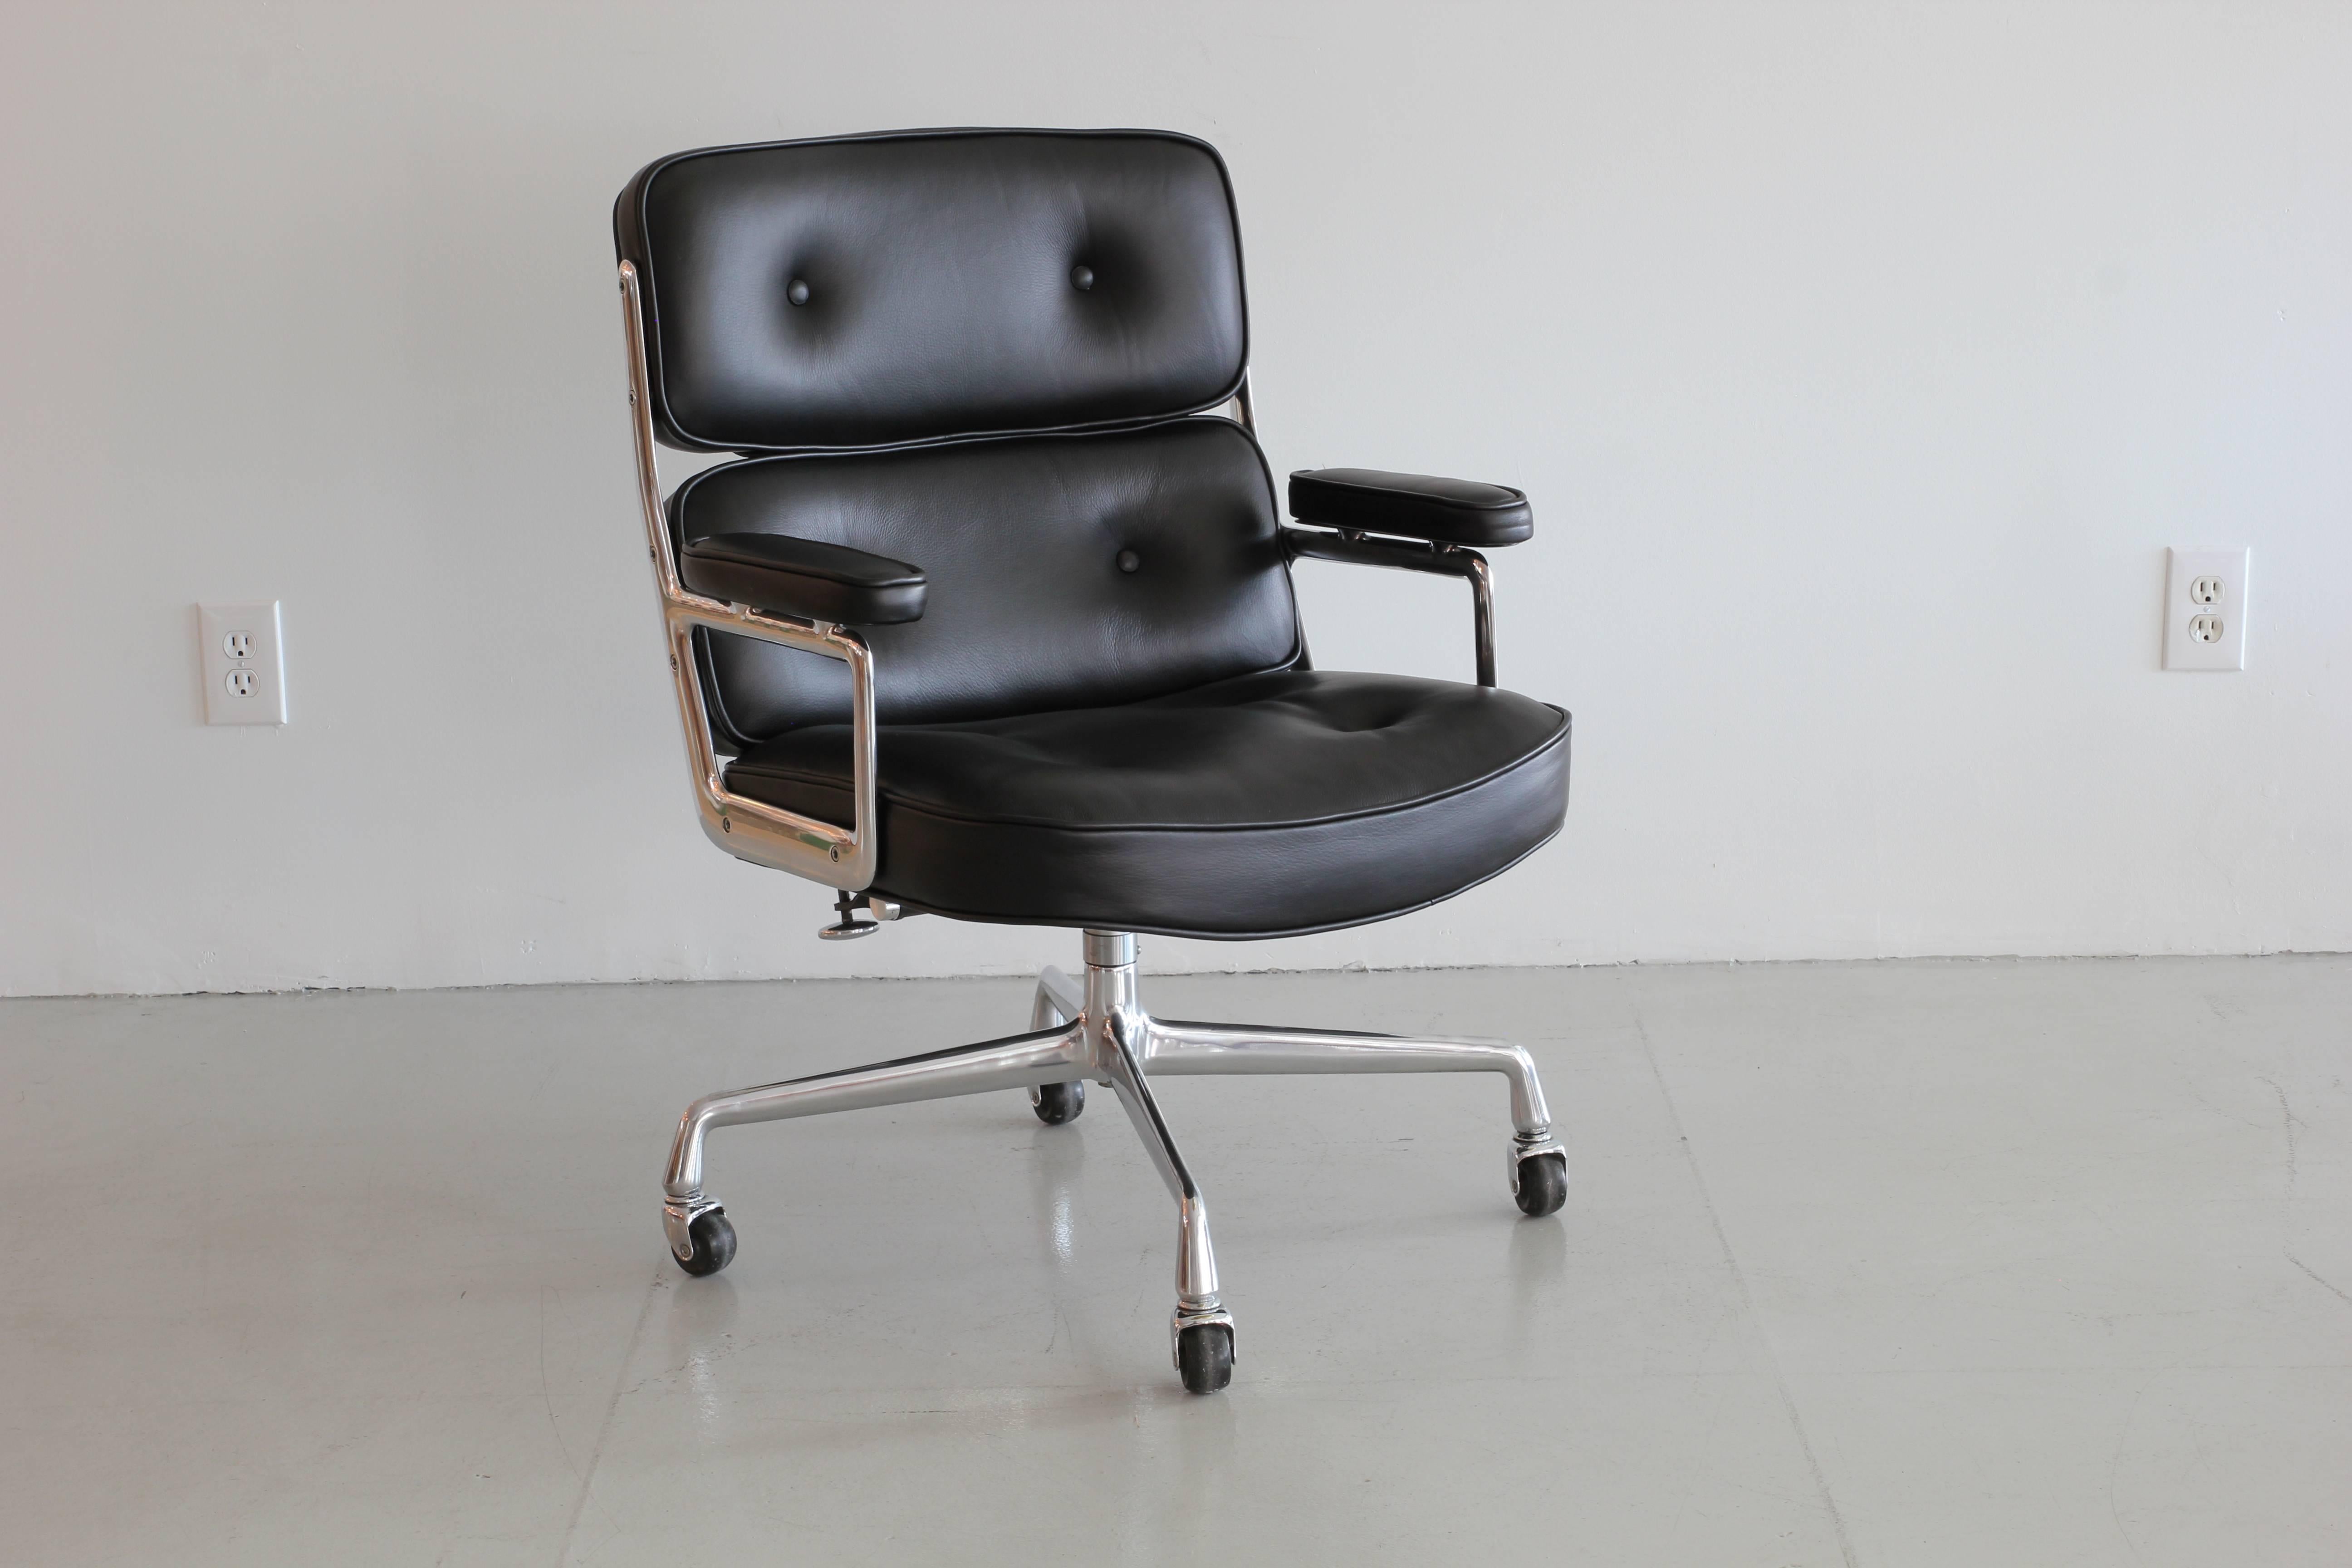 Classic office chair from the Time Life building in New York. Designed by Eames featuring newly upholsteredl black leather, new casters and a newly polished aluminium base and frame. Chair is height adjustable with tilt and swivel.